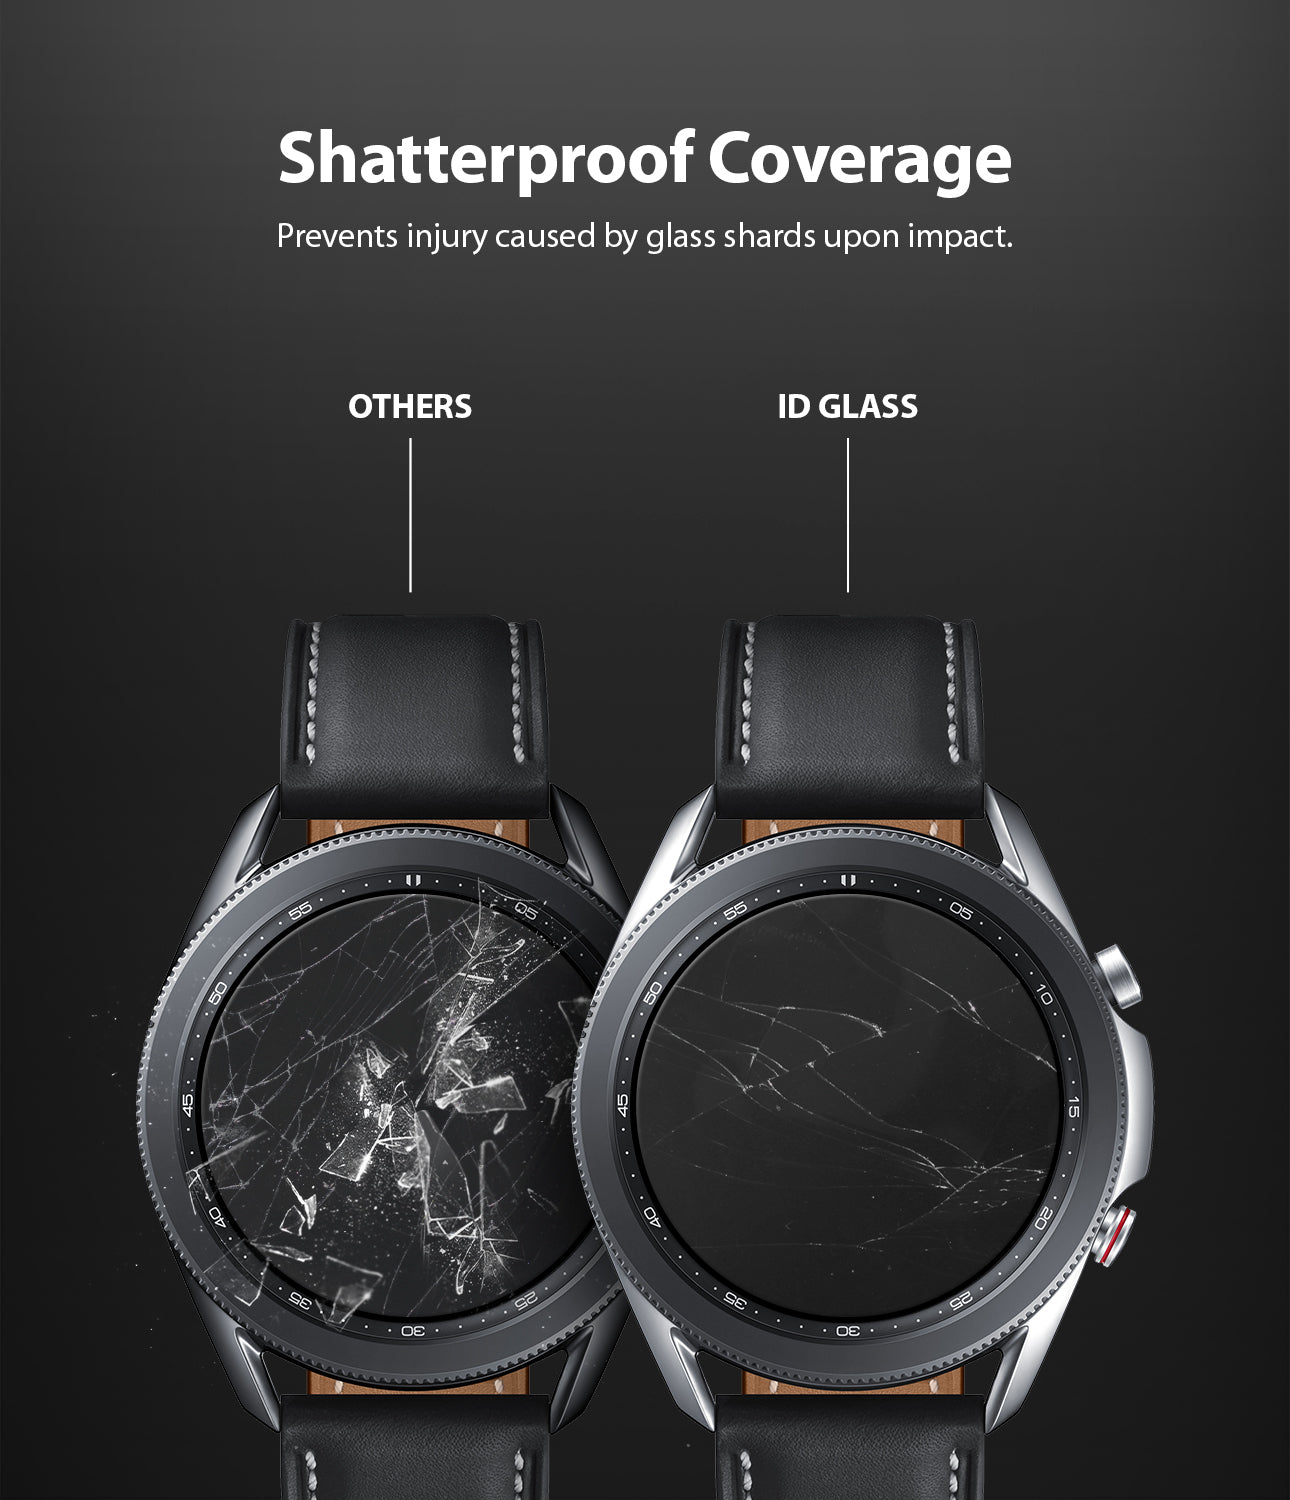 shatterproof coverage - prevents injury caused by glass shards upon impact